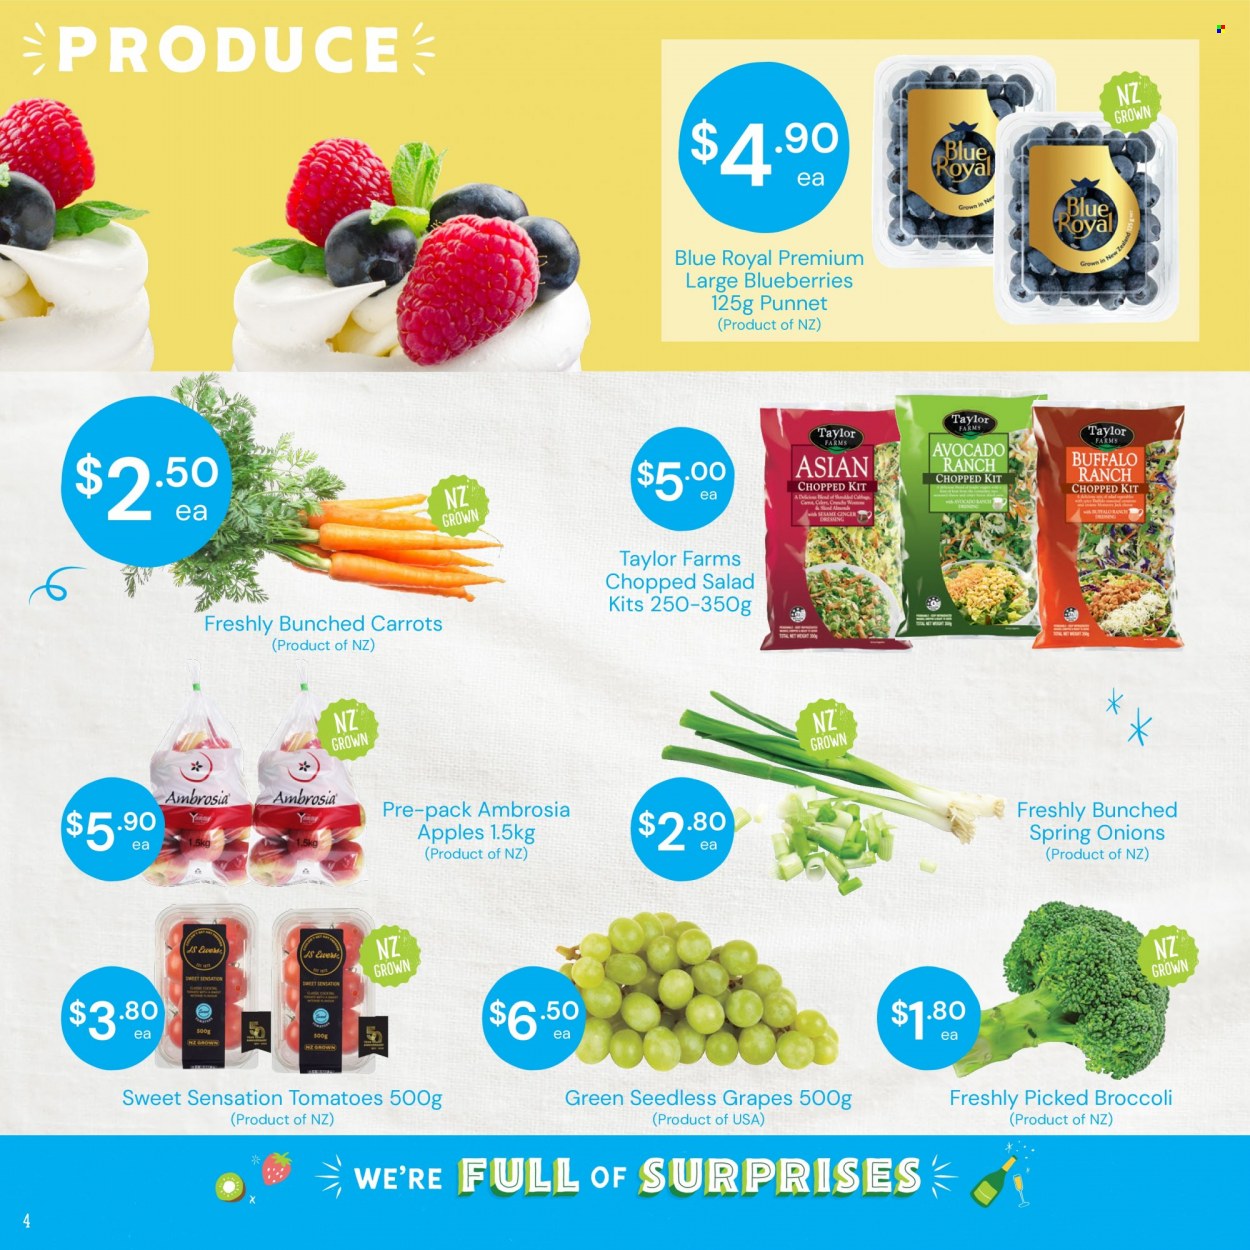 thumbnail - Fresh Choice mailer - 28.11.2022 - 04.12.2022 - Sales products - broccoli, carrots, ginger, tomatoes, onion, salad, chopped salad, blueberries, grapes, seedless grapes, apples, dressing, almonds. Page 4.